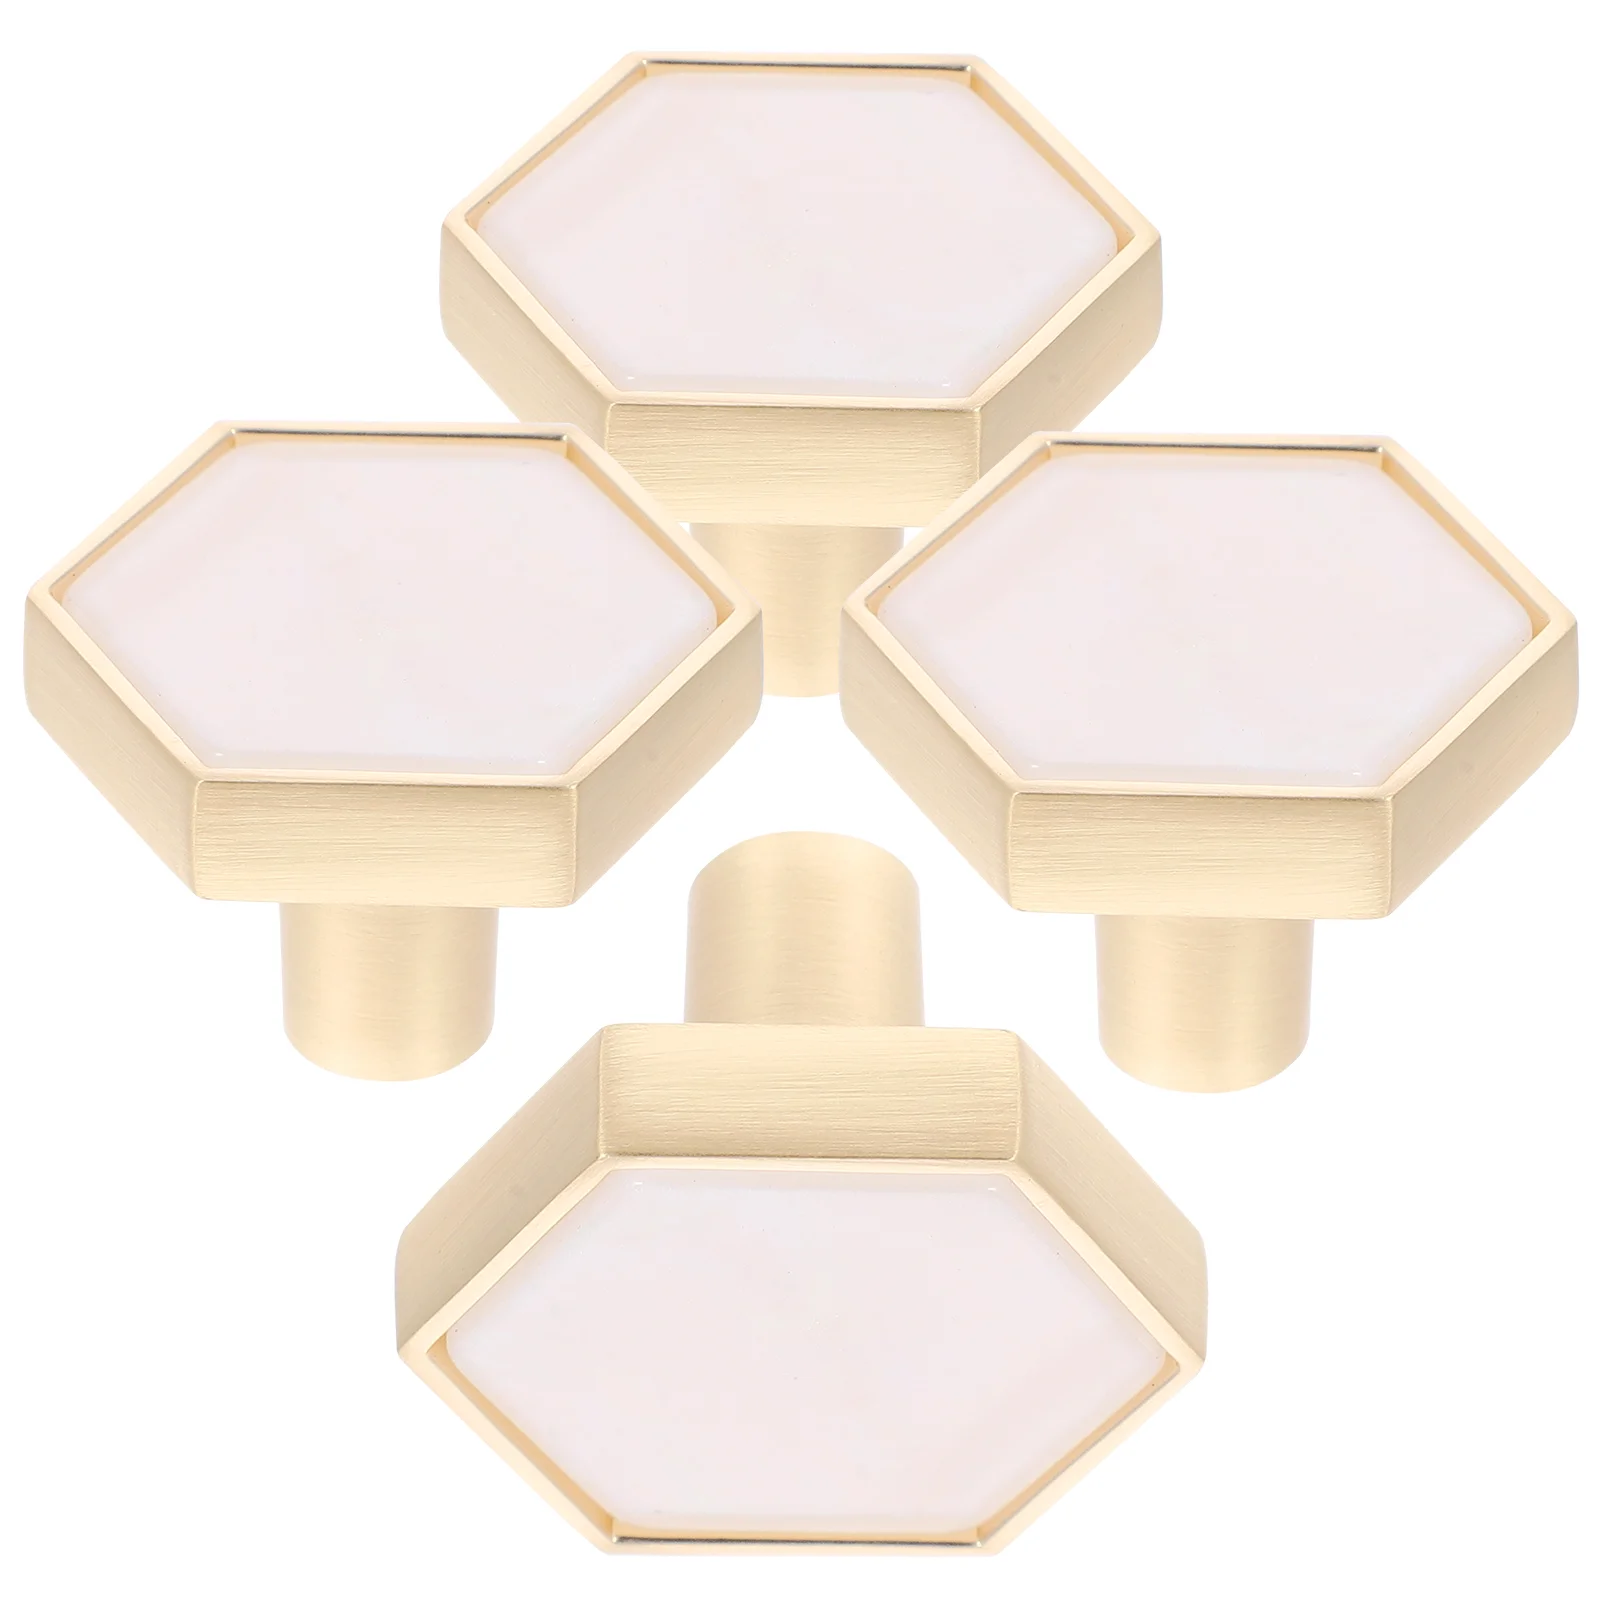 

4 Pcs Brass Drawer Handle Knobs Kitchen Cabinet Handles for Cabinets Drawers Pulls Dresser Resin